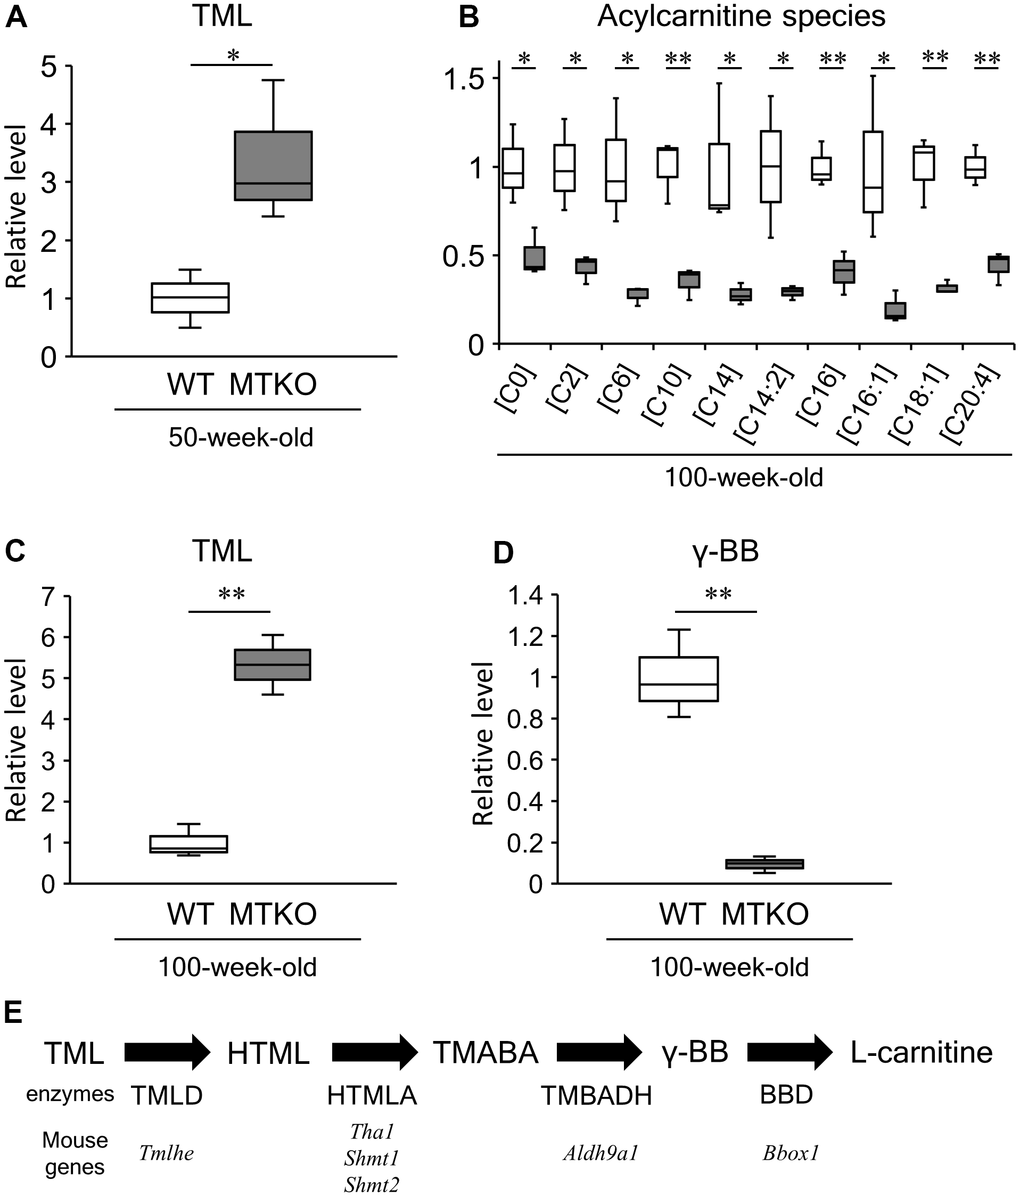 Levels of acylcarnitine species and carnitine biosynthesis intermediates in plasma of wild-type (WT) mice (white boxes) and MTKO mice (gray boxes). (A) N6,N6,N6-trimethyl-L-lysine (TML) level at 50 weeks of age; (B) Levels of L-carnitine [C0] and acylcarnitine species (L-acetylcarnitine [C2], Hexanoylcarnitine [C8], Decanoylcarnitine [C10], Tetradecanoylcarinitne [C14], 3,5-Tetradecadiencarnitine [C14:2], L-Palmitoylcarnitine [C16], 9-Hexadecenoylcarnitine [C16:1], Oleoylcarnitine [C18:1], Arachidonoylcarnitine [C20:4]) at 100 weeks of age; (C) TML level at 100 weeks of age; (D) Level of γ-butryobetaine (γ-BB), also known as 4-trimethylammoniobutanoic acid, at 100 weeks of age. The box denotes 25th and 75th percentiles; the line within the box denotes the 50th percentile; the whisker denotes standard deviation. (n = 3). *P P E) Carnitine biosynthesis pathway. HTML, 3-hydroxyl-N6-trimethyl-L-lysine; TMABA, 4-trimethyl-aminobutyraldehyde; TML dioxygenase, TMLD; HTML aldolase, HTMLA; TMABA dehydrogenase, TMABADH; γ-BB dioxygenase, BBD.